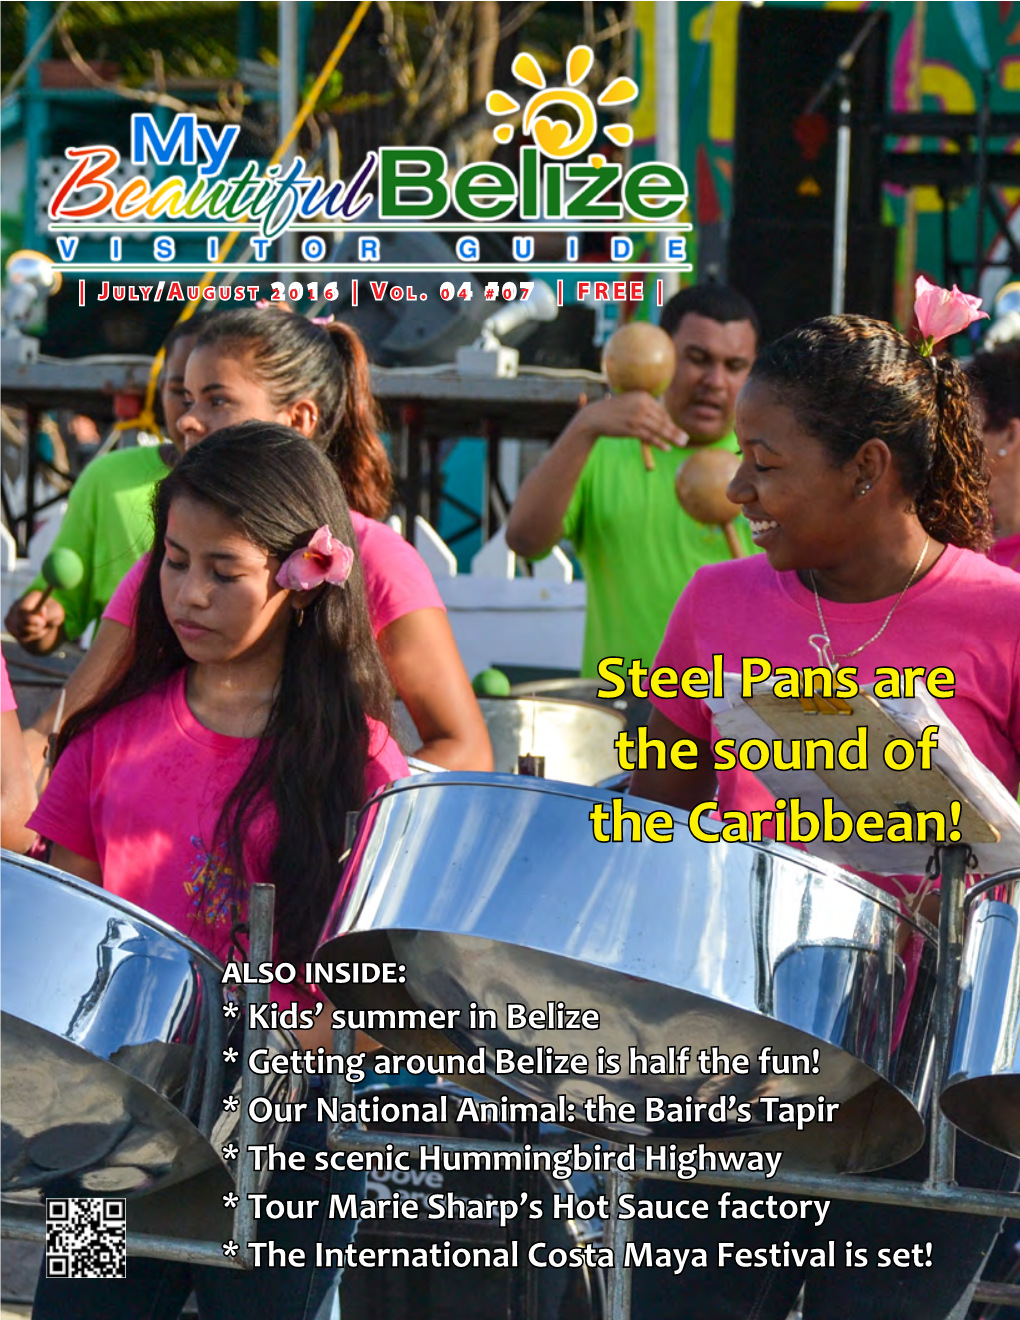 Steel Pans Are the Sound of the Caribbean!